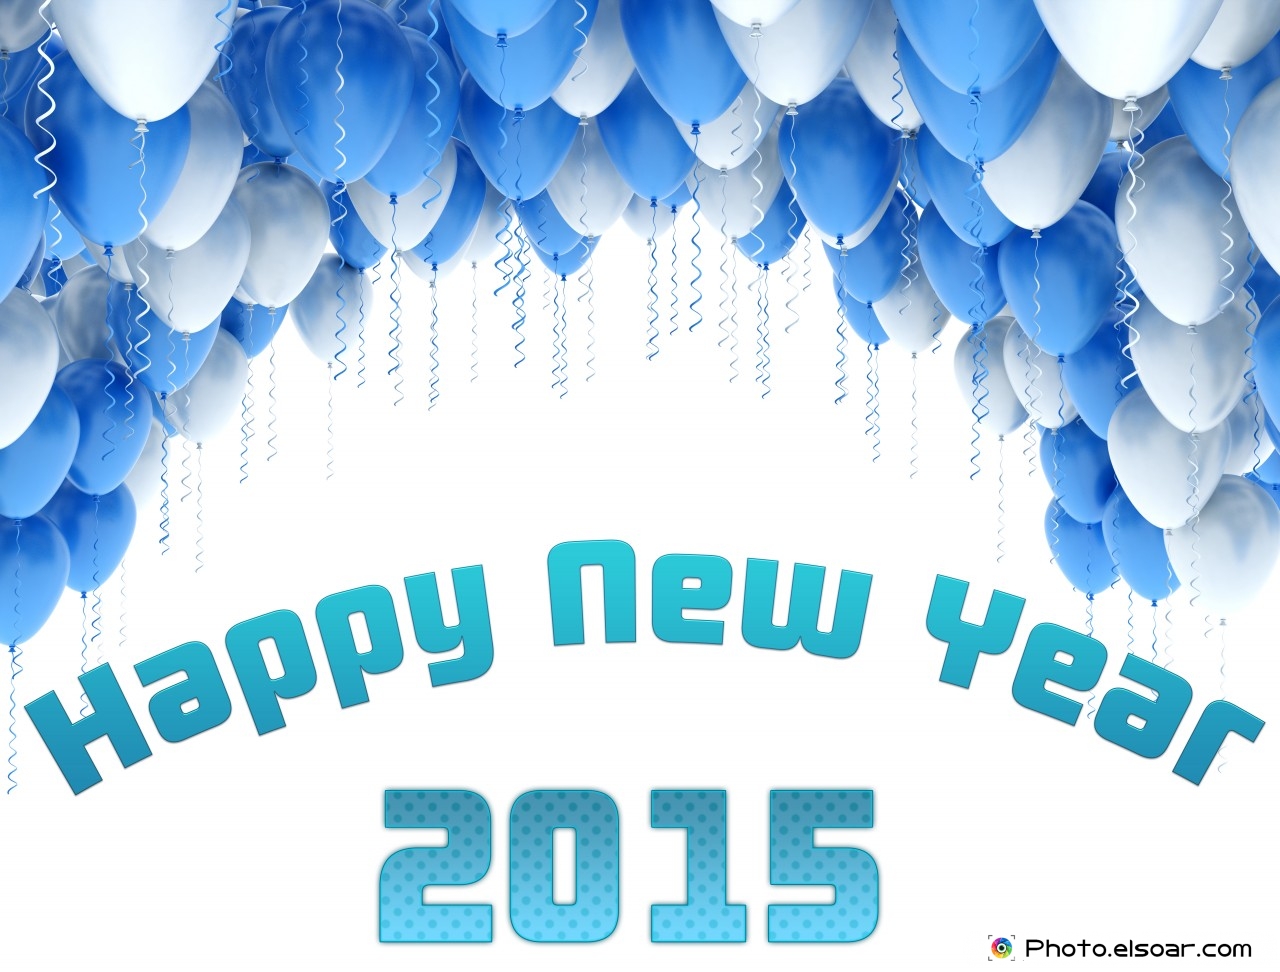 Happy New Year Messages Blue And White Balloons